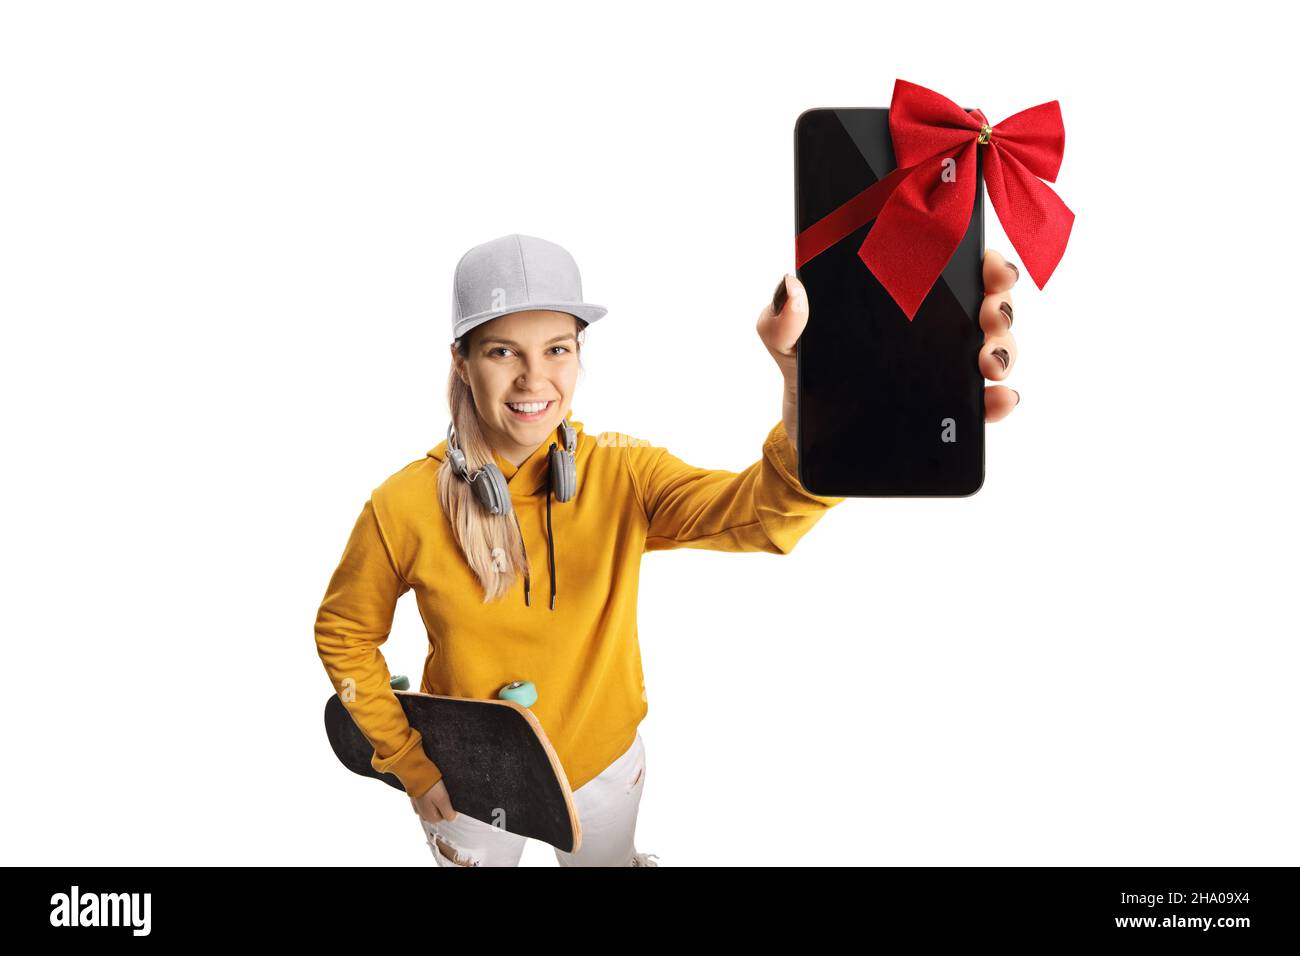 Female teen with headphones and a skateboard holding a smartphone with red bow in front of camera isolated on white background Stock Photo